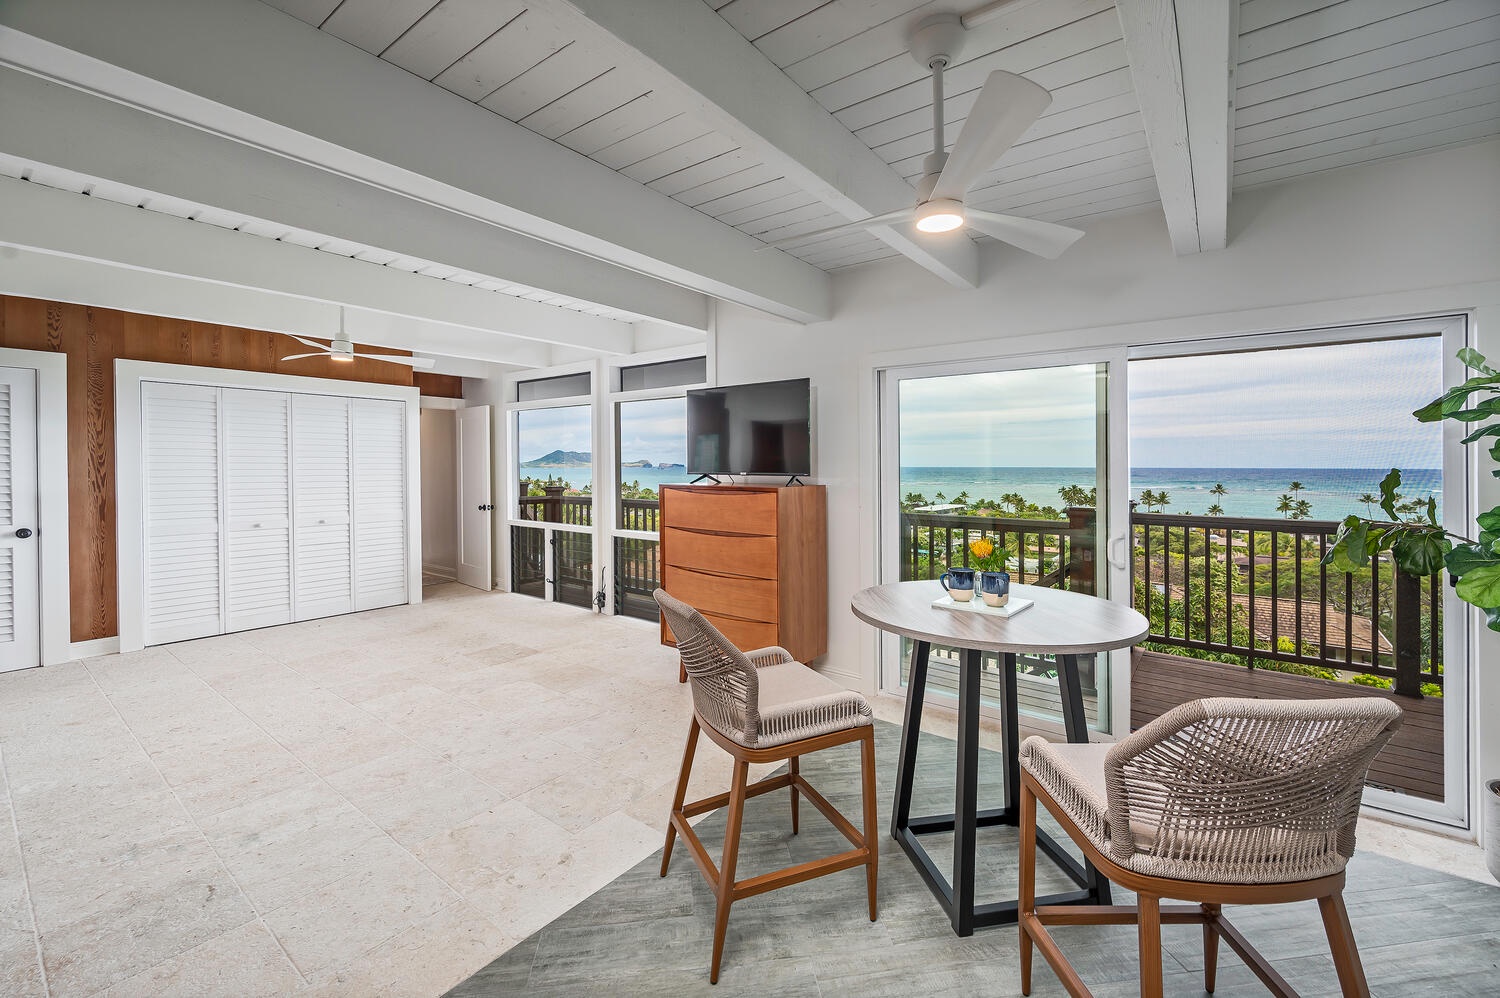 Kailua Vacation Rentals, Hale Lani - Enjoy a cup of coffee with gorgeous views